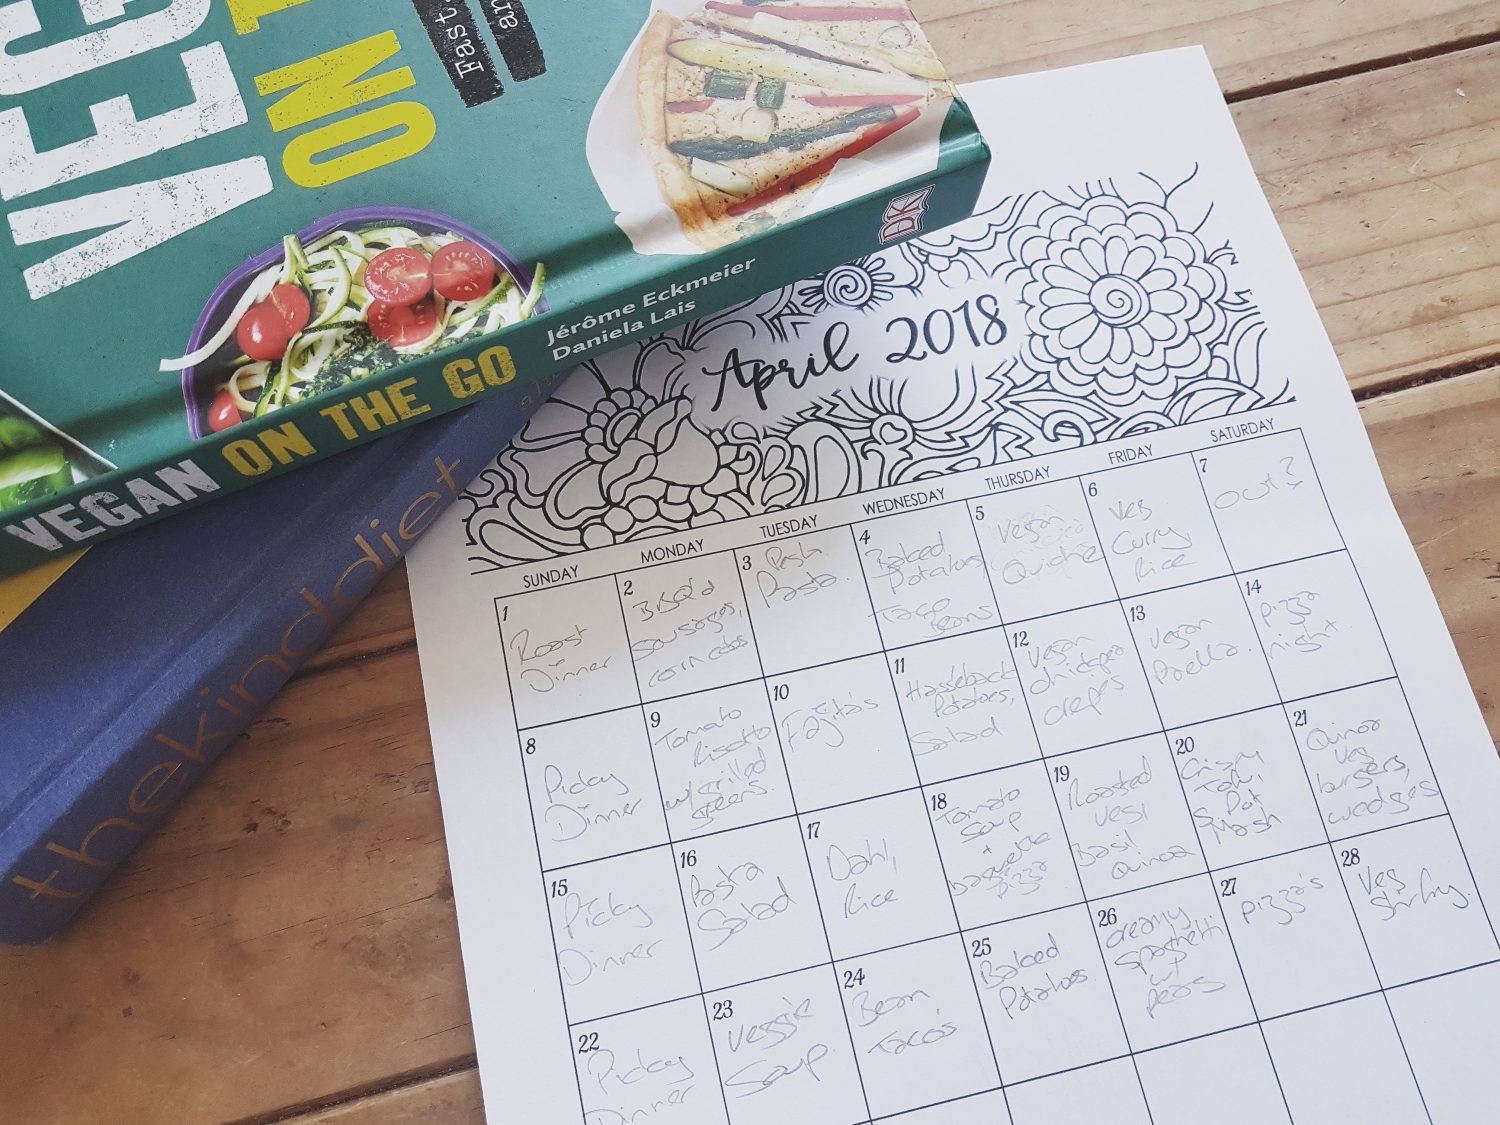 Vegan family meal plan for a month